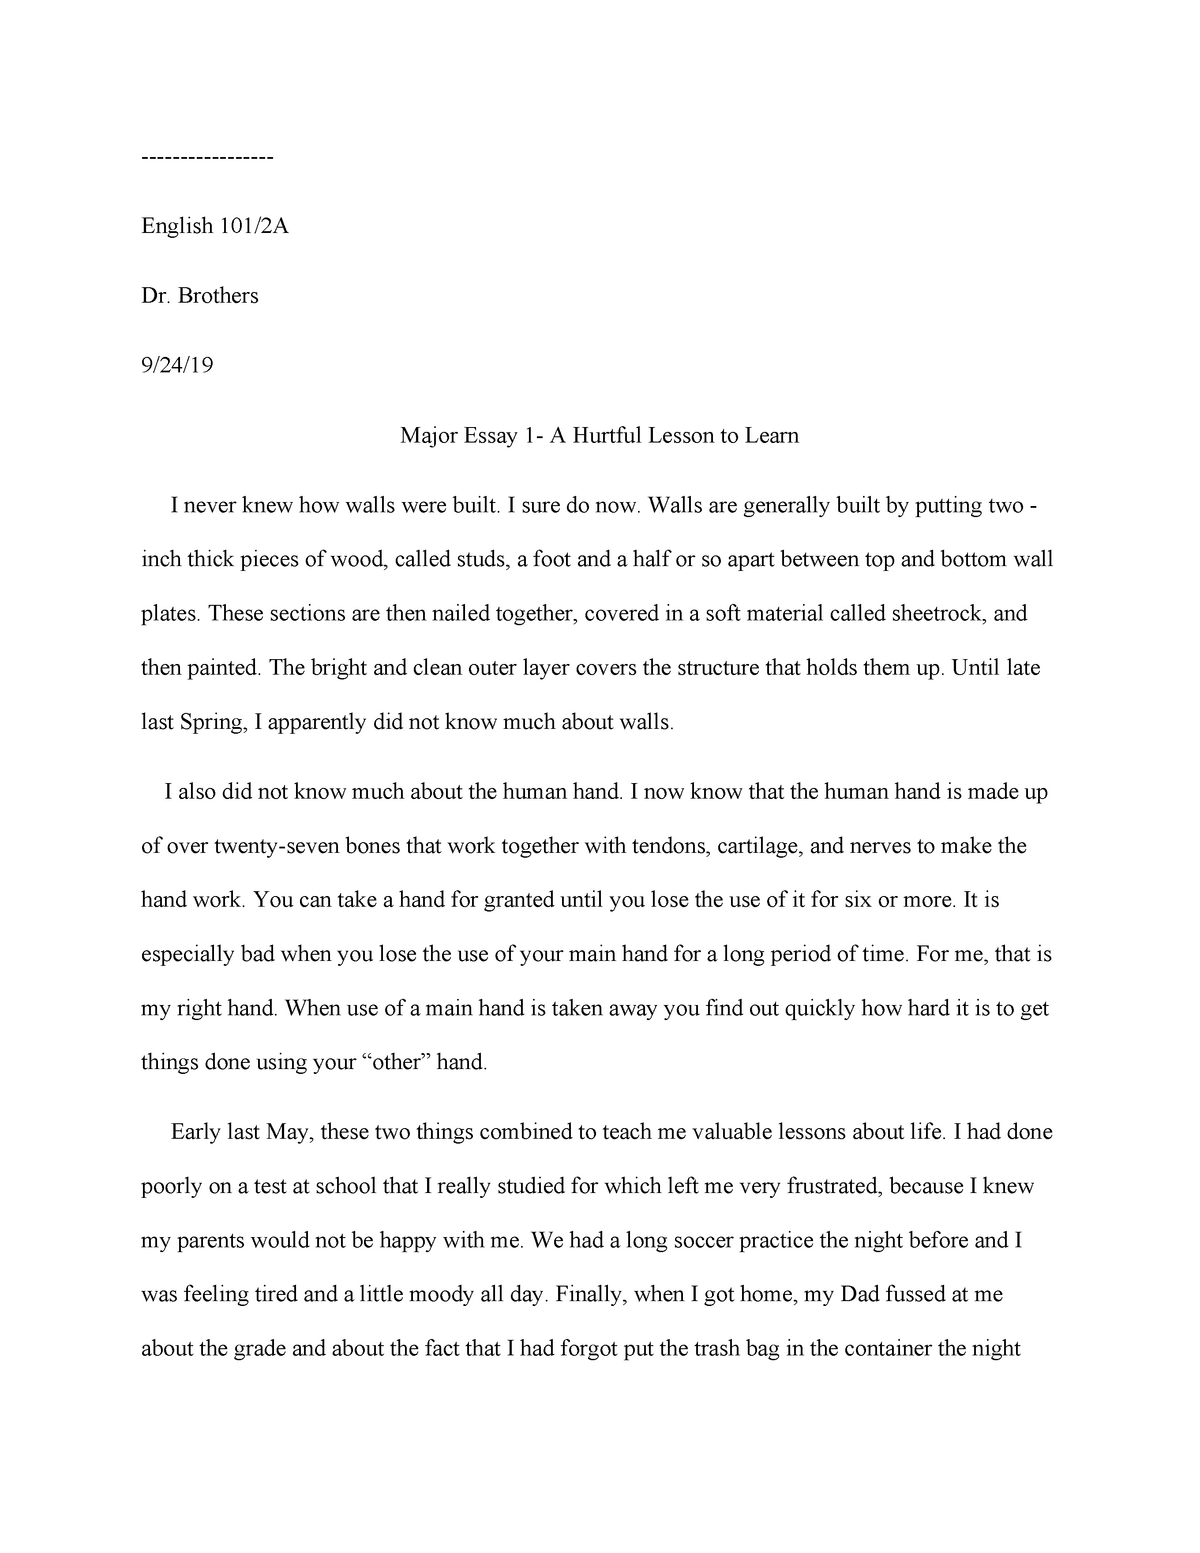 essay about a lesson learned